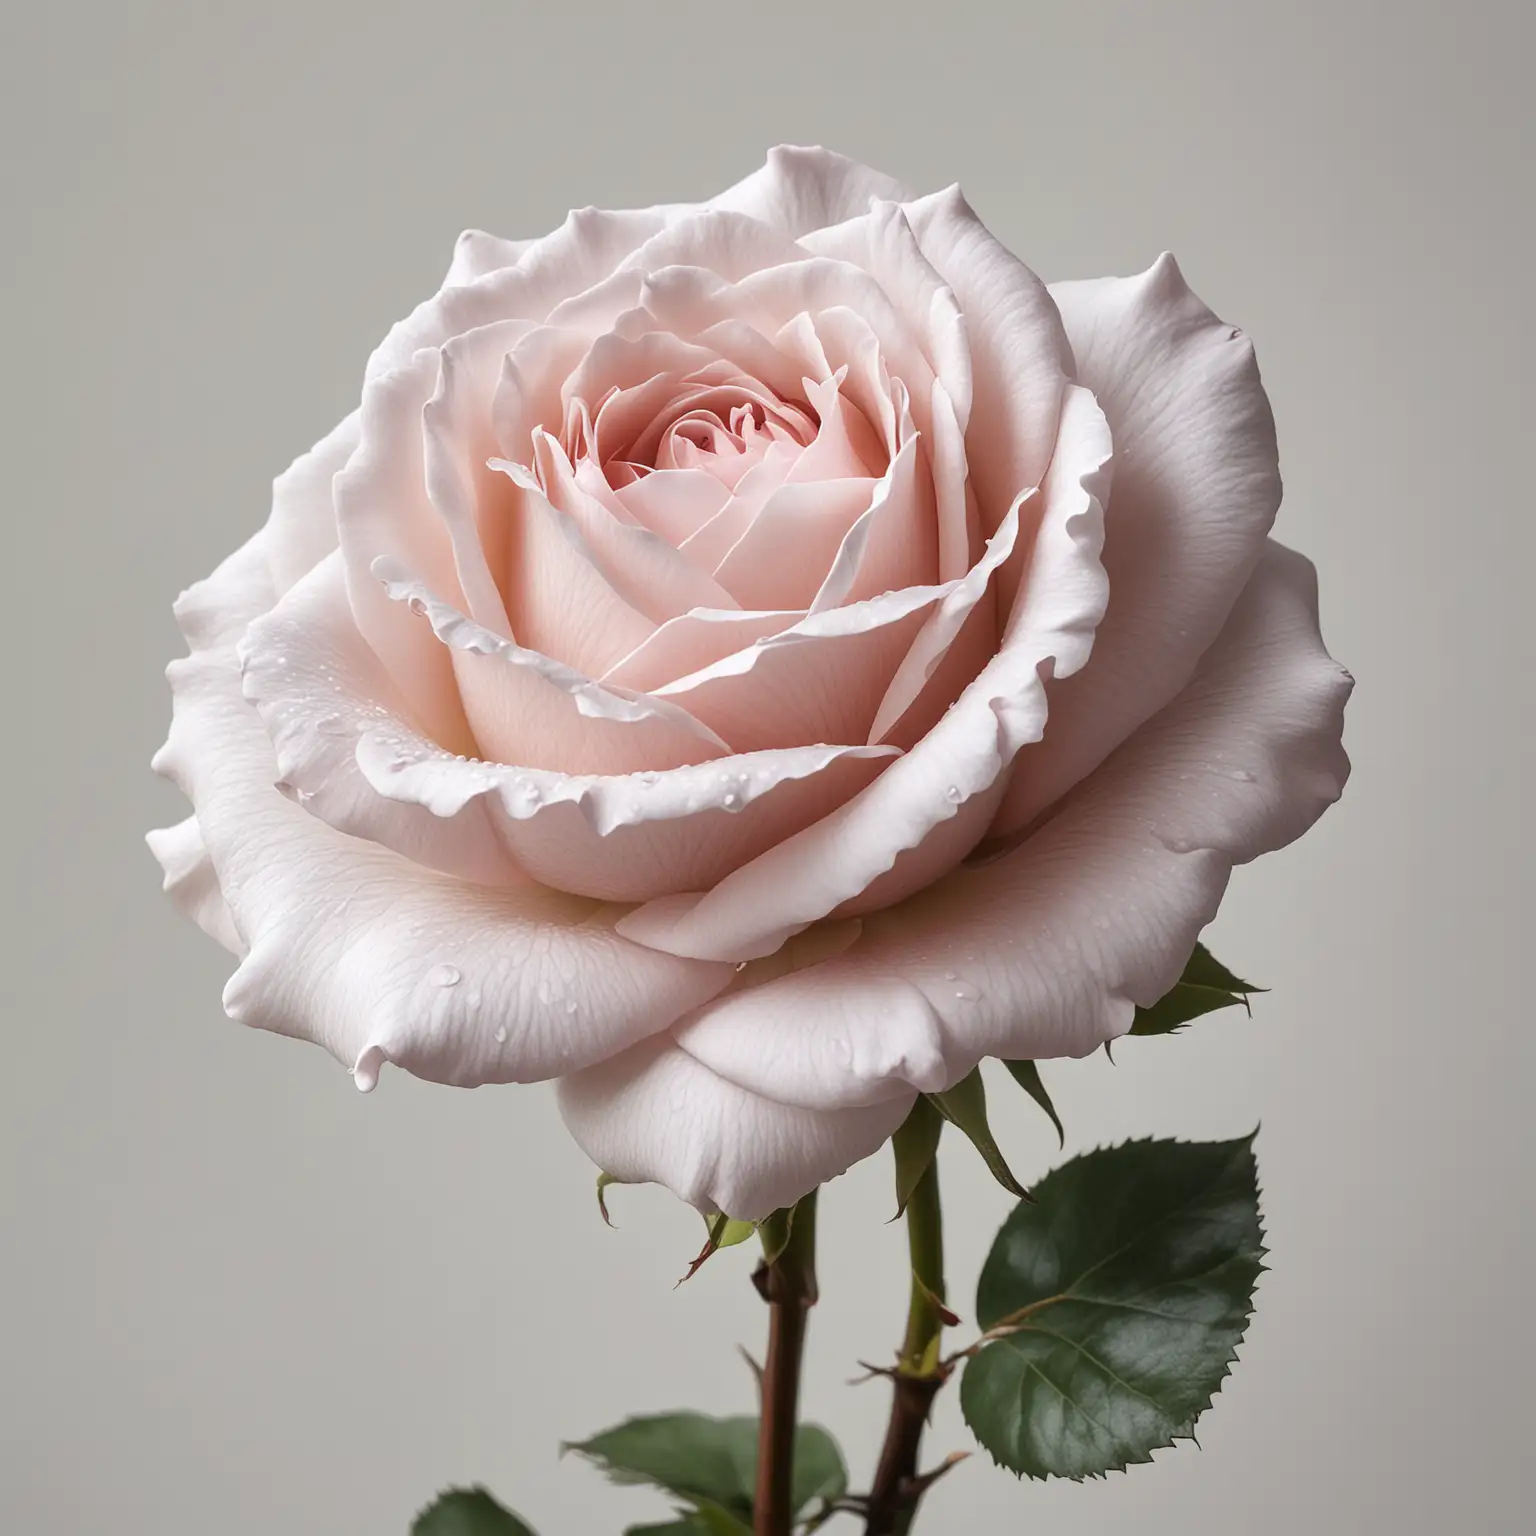 Moody Pale Pink Garden Rose on White Background